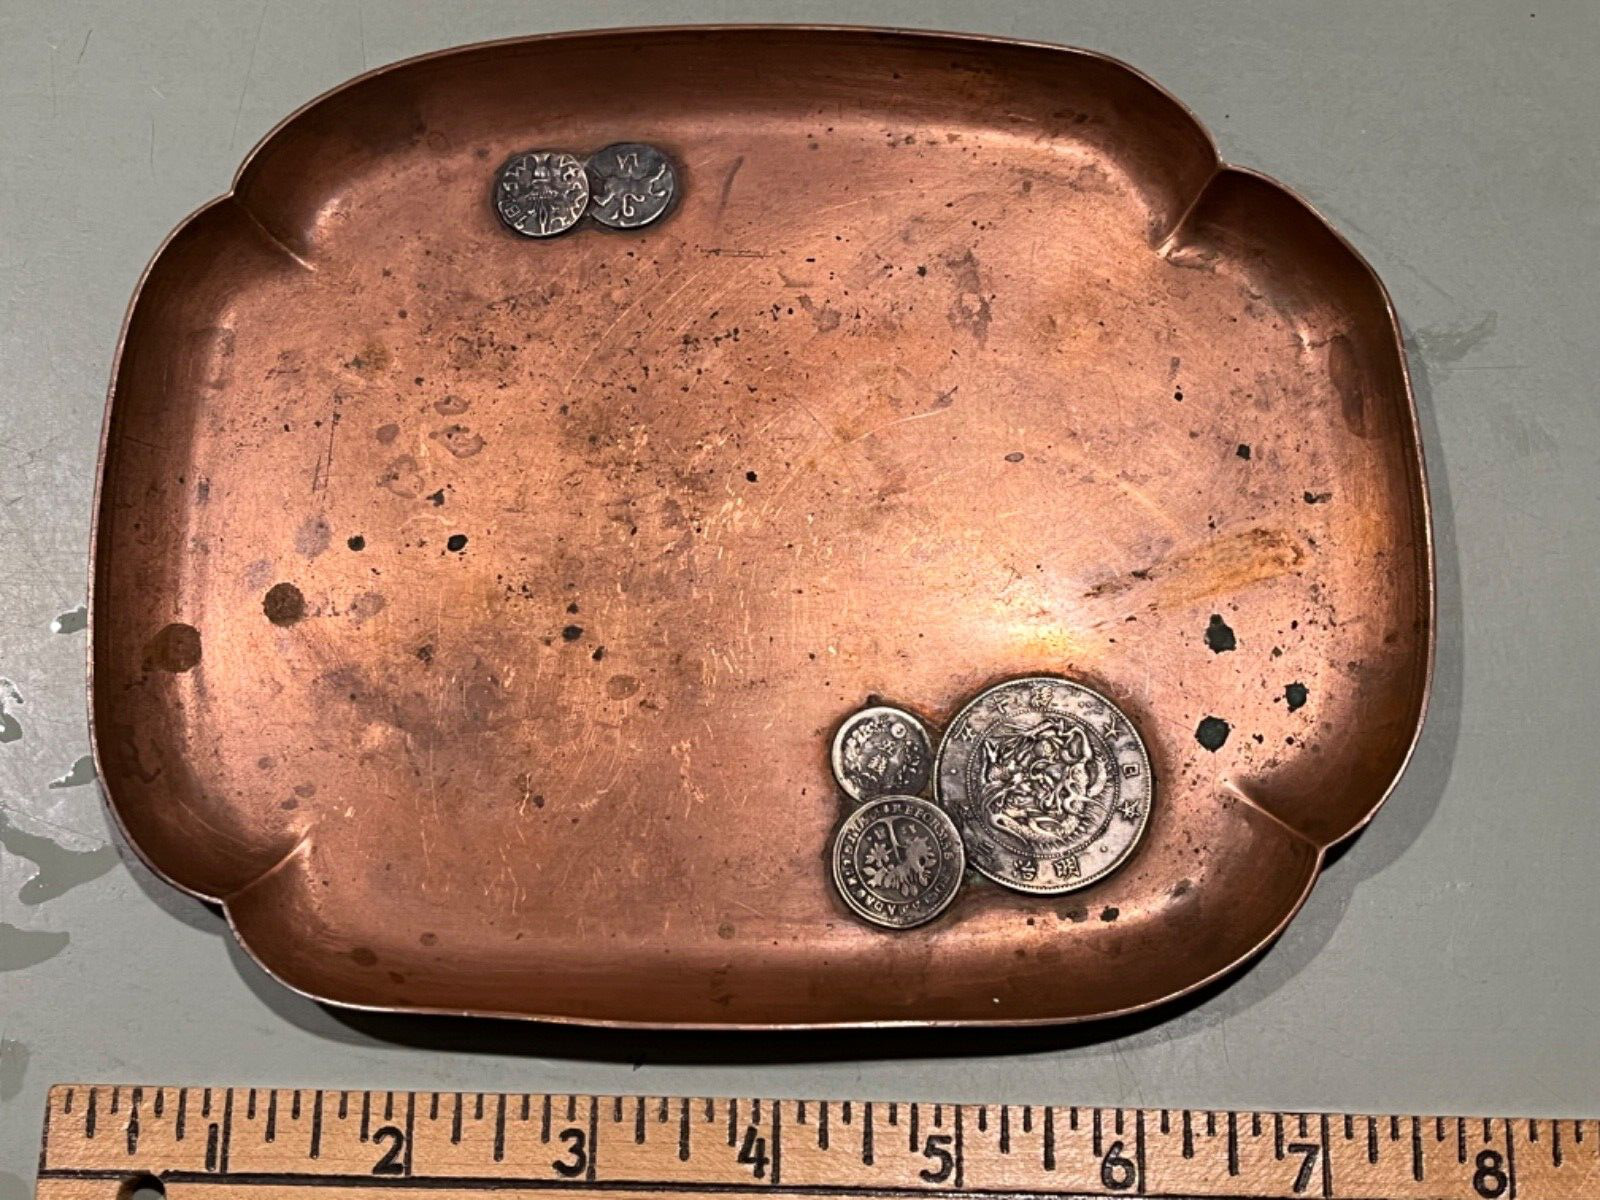 Gorham mixed metal Aesthetic copper & silver Chinese coins tray c.1885